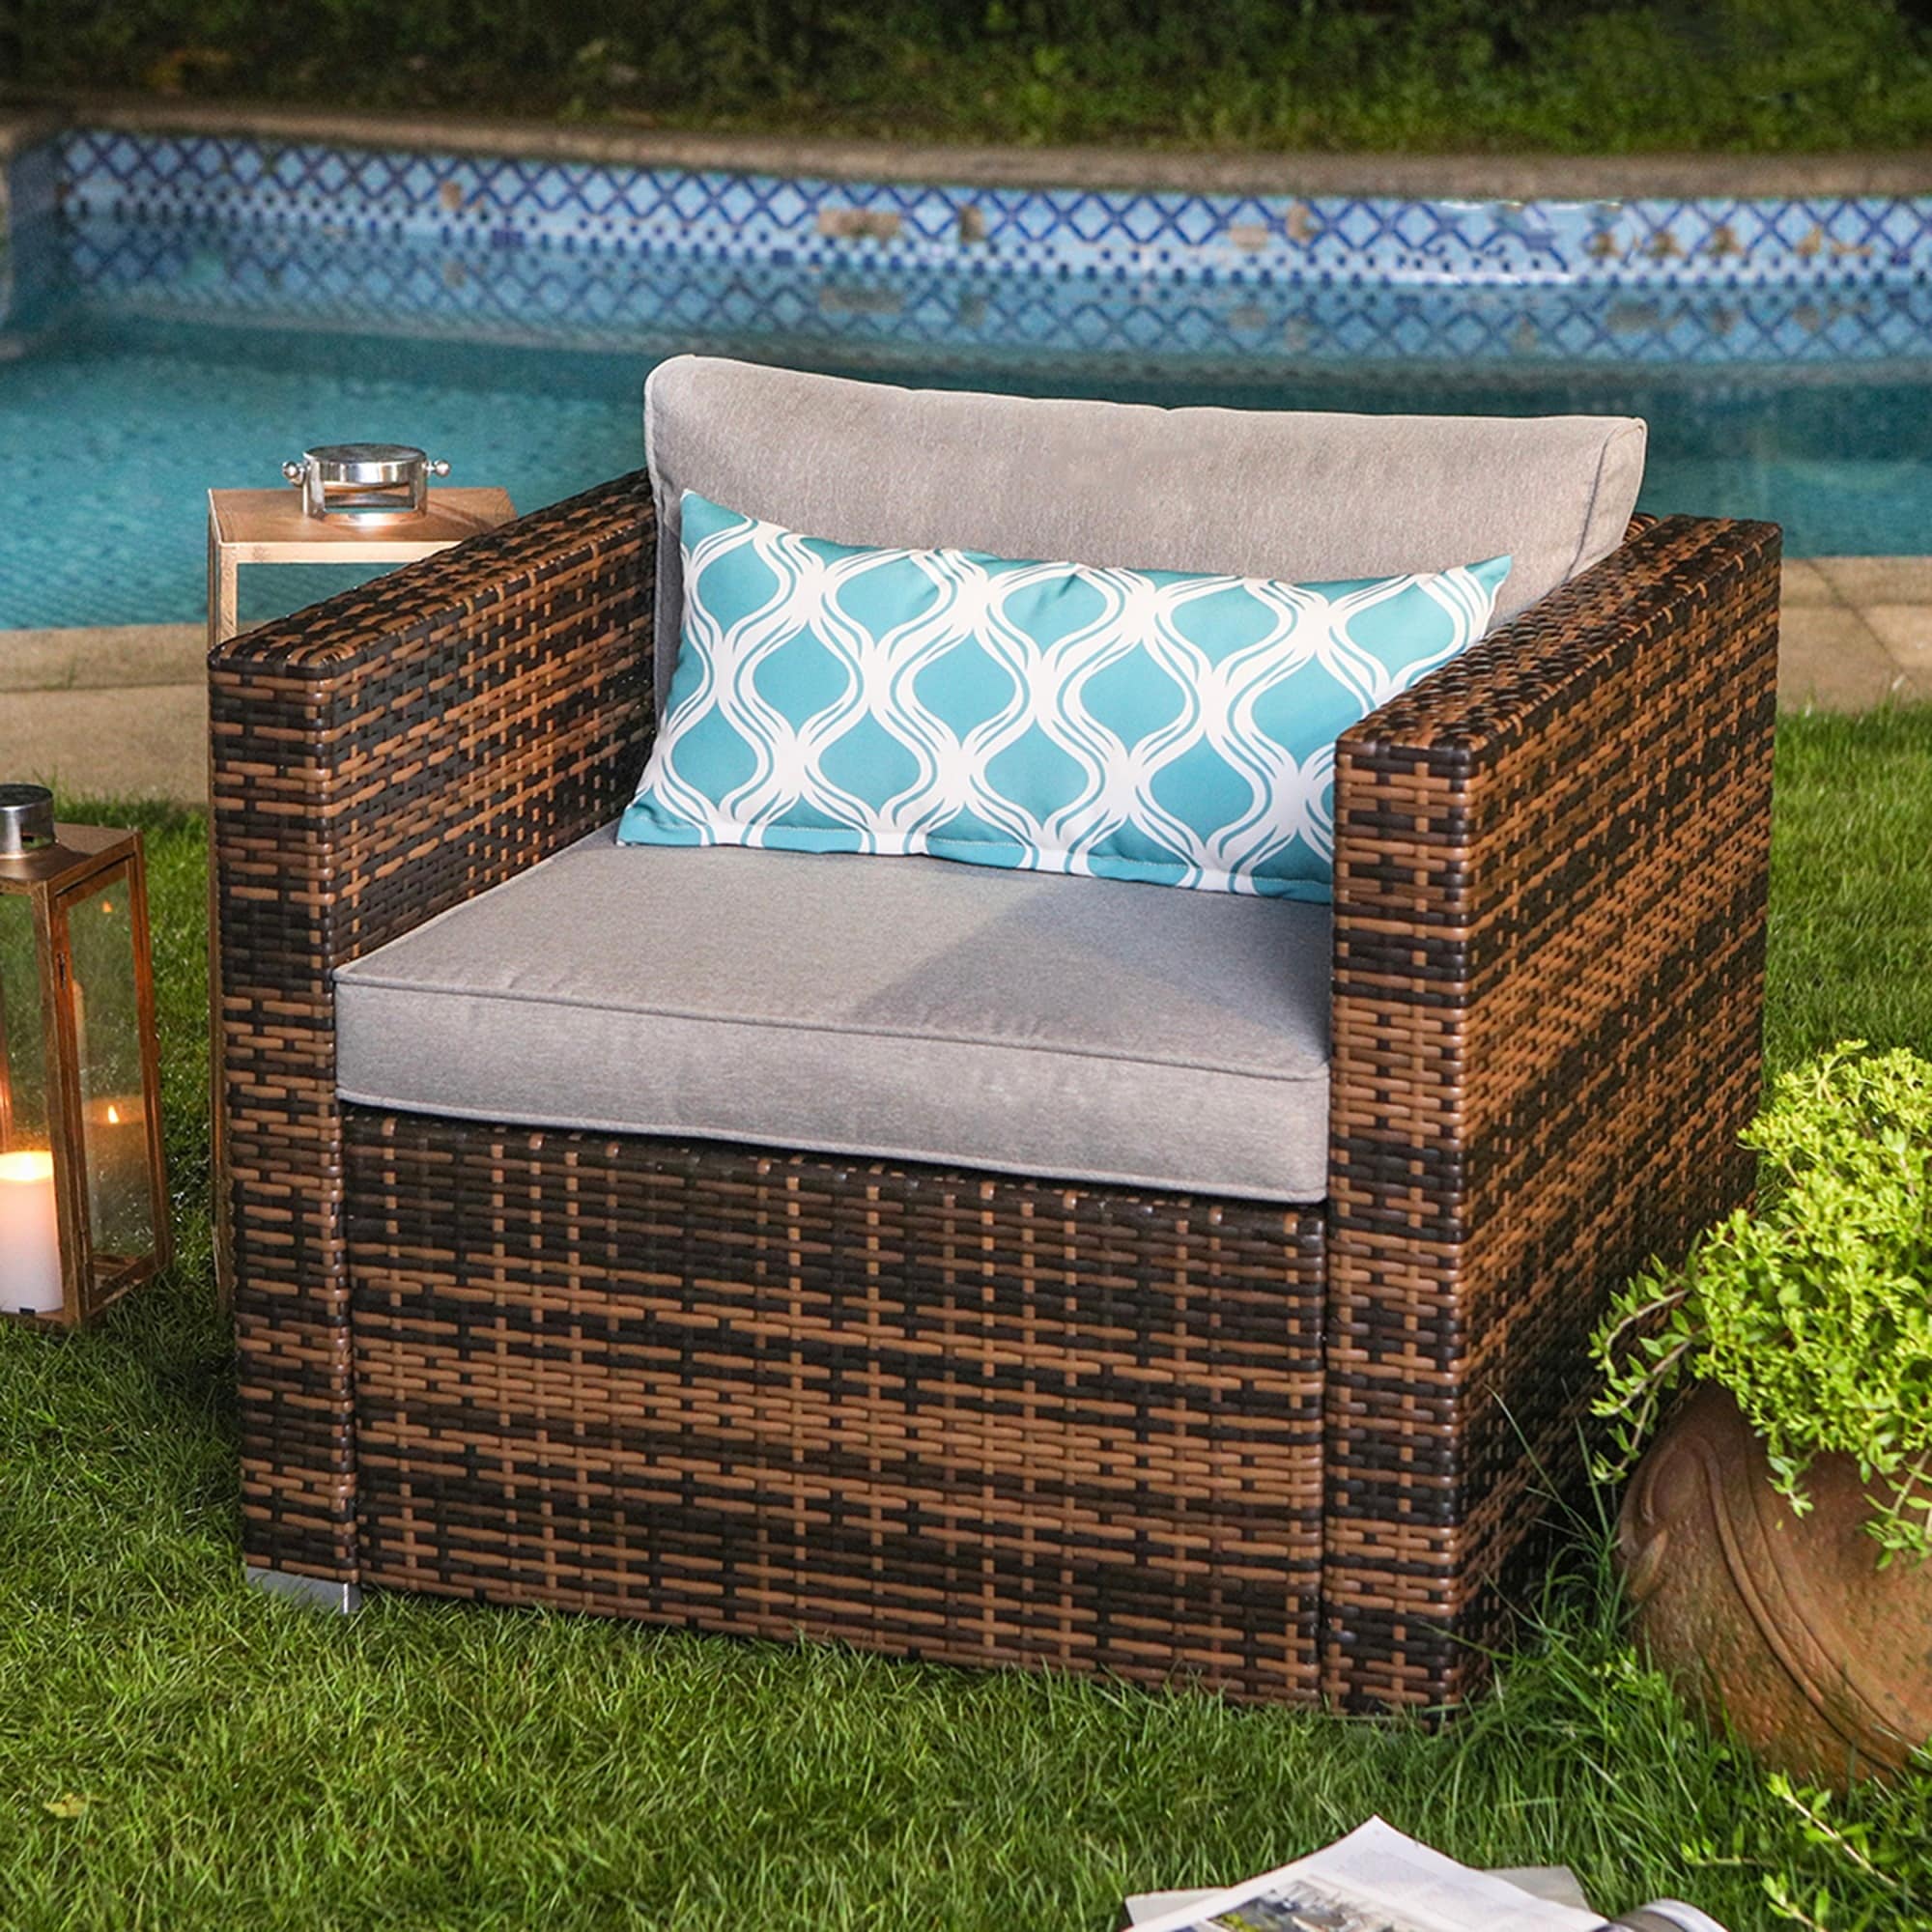 Add-on Wicker Single Armless Seat in Blue Sunbury Patio Sectional Sofa Chair w Pillow in Psychedelic Colors Elegant Outdoor Furniture Seating for Backyard